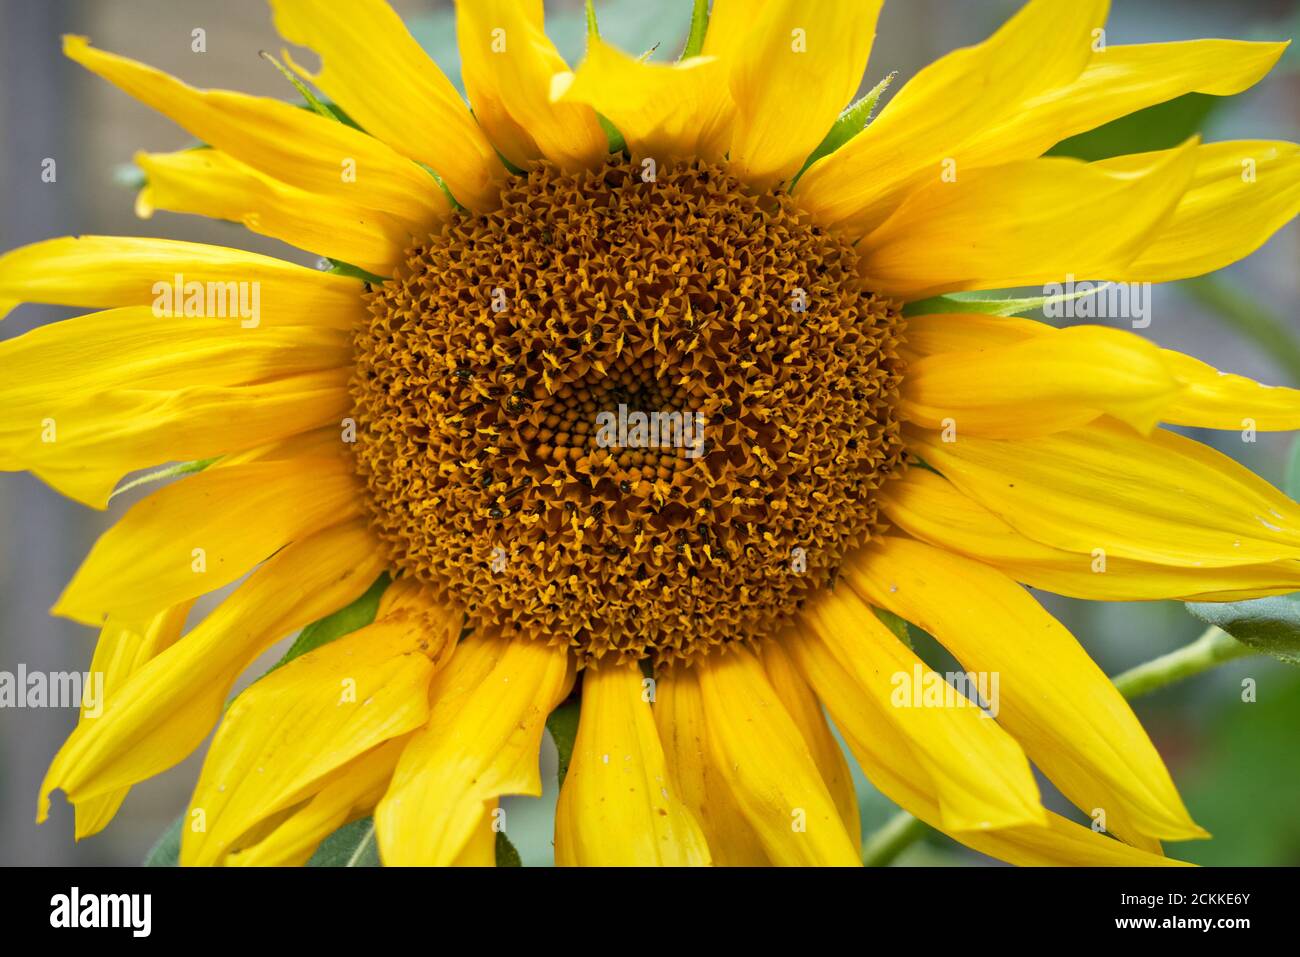 Close up of the flower head of a large yellow Helianthus sunflower in full bloom Stock Photo